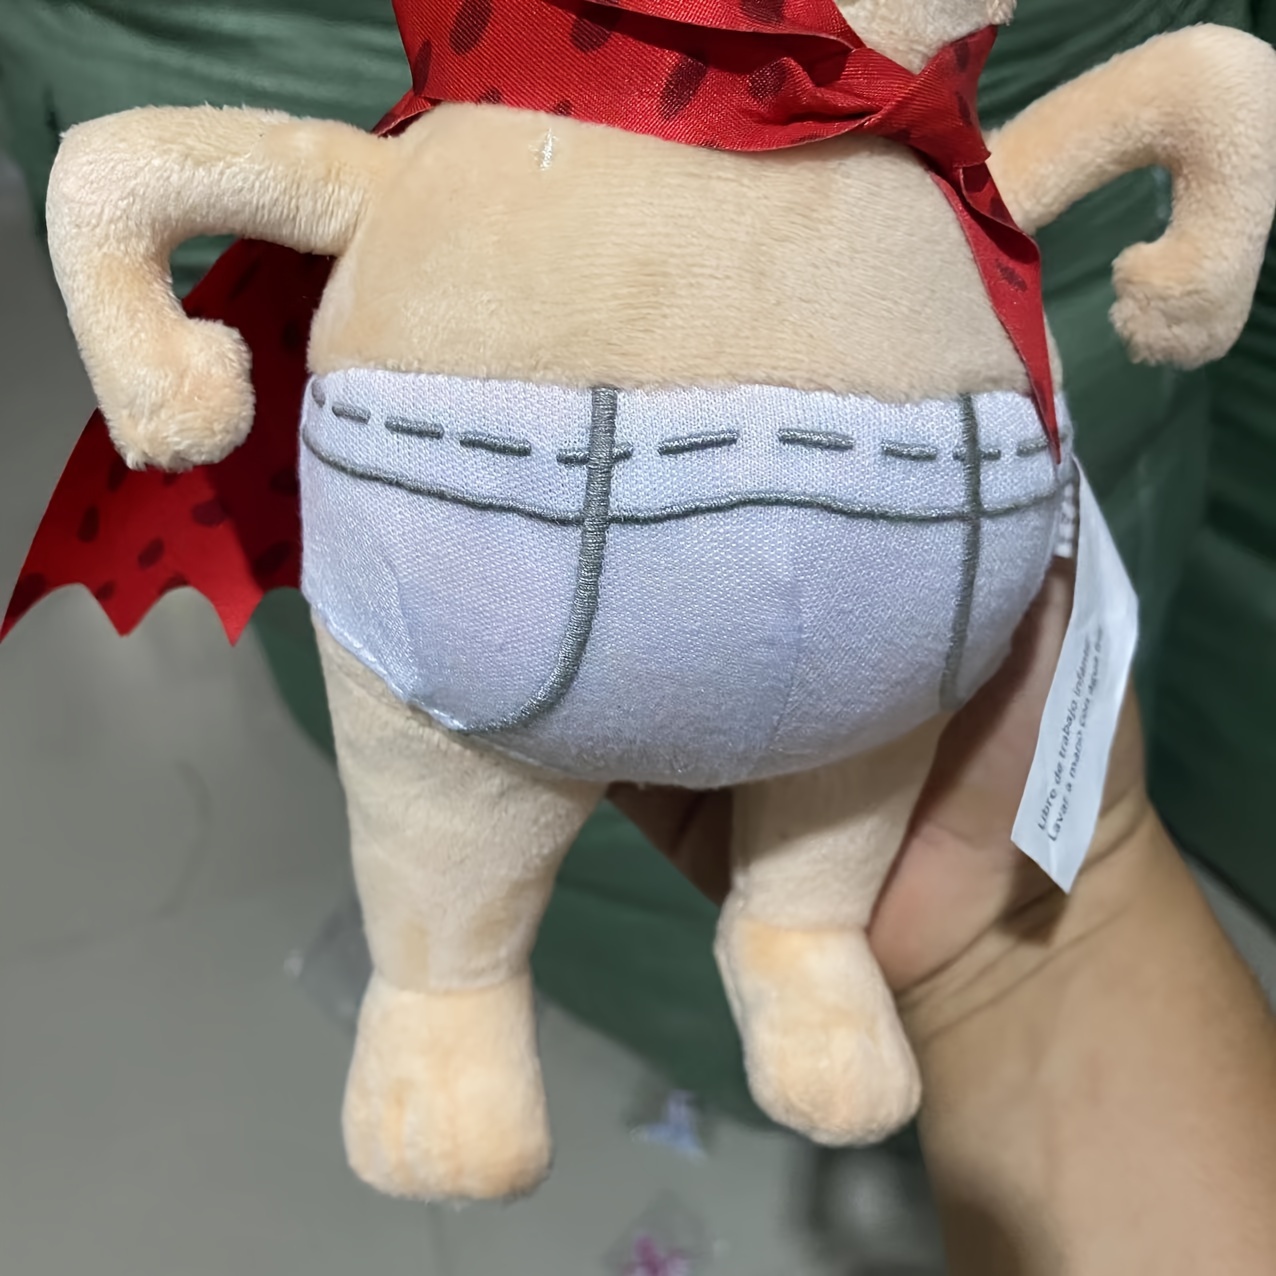 Captain Underpants Soft Plush Toy 8 inch Stuffed Figure Doll Kids Gift